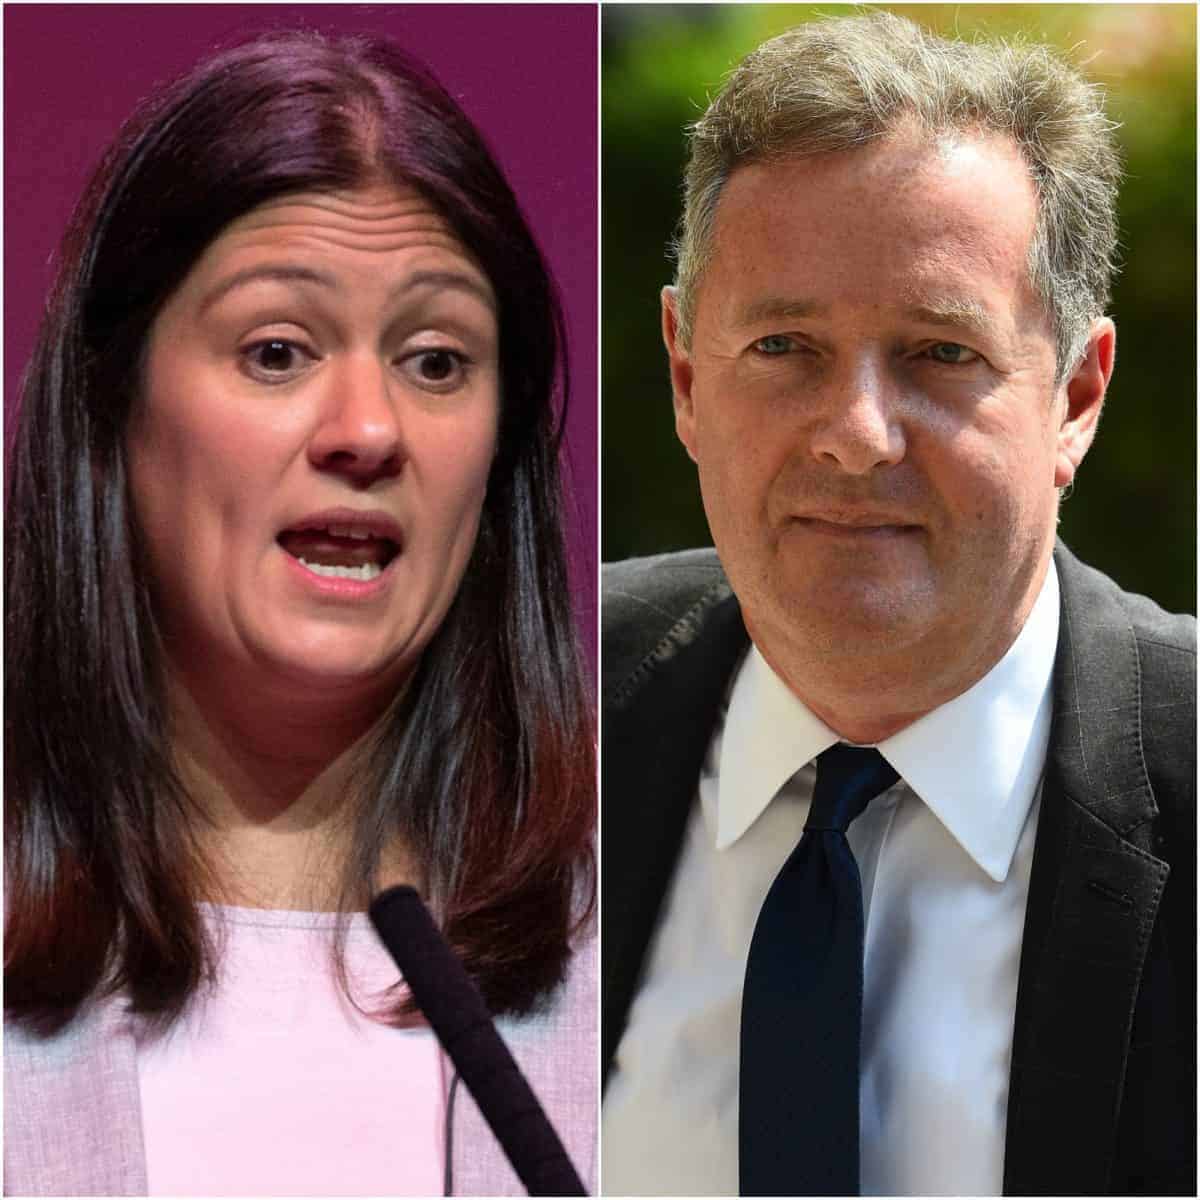 Lisa Nandy in heated row with Piers Morgan over transgender rights